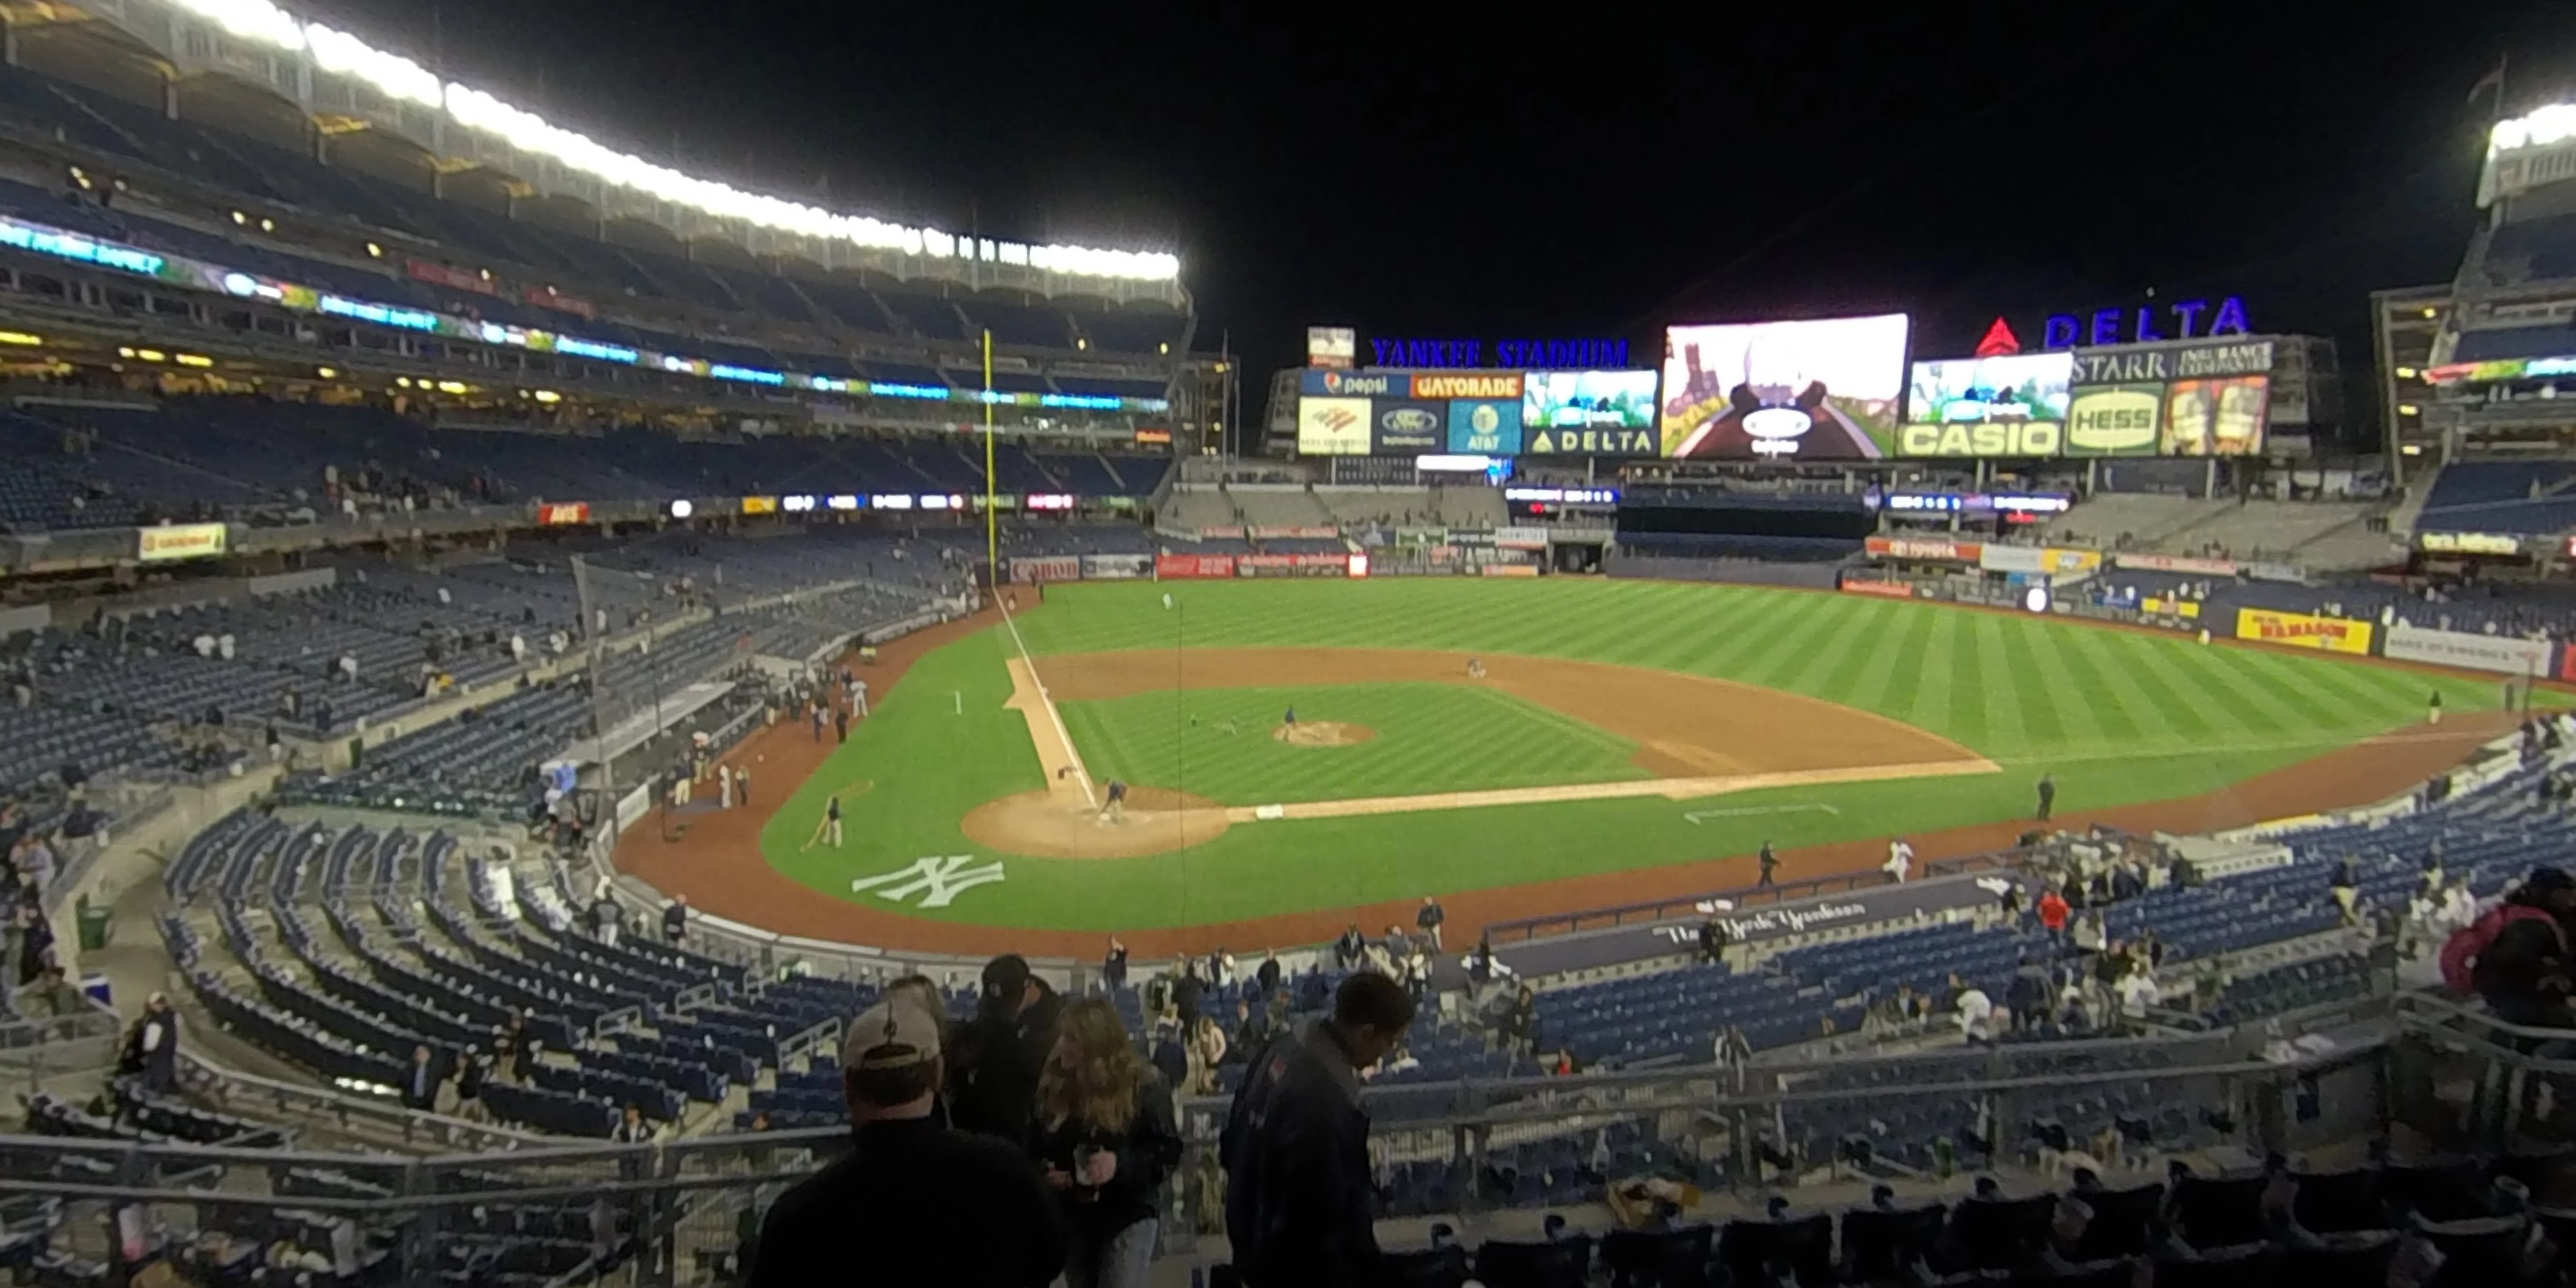 section 218a panoramic seat view  for baseball - yankee stadium